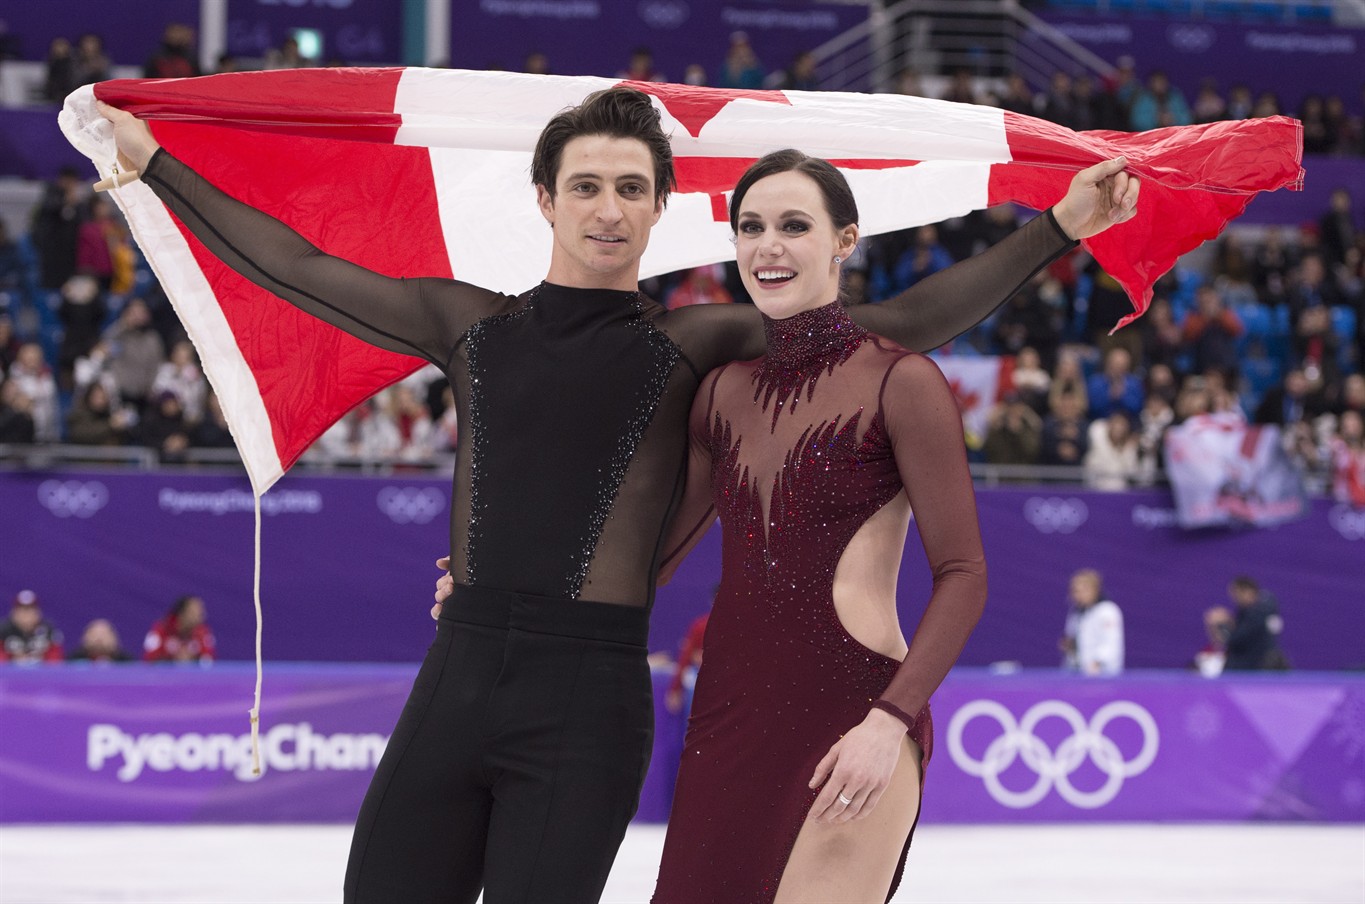 Tessa Virtue and Scott Moir performing in Kitchener as part of 1365 x 904